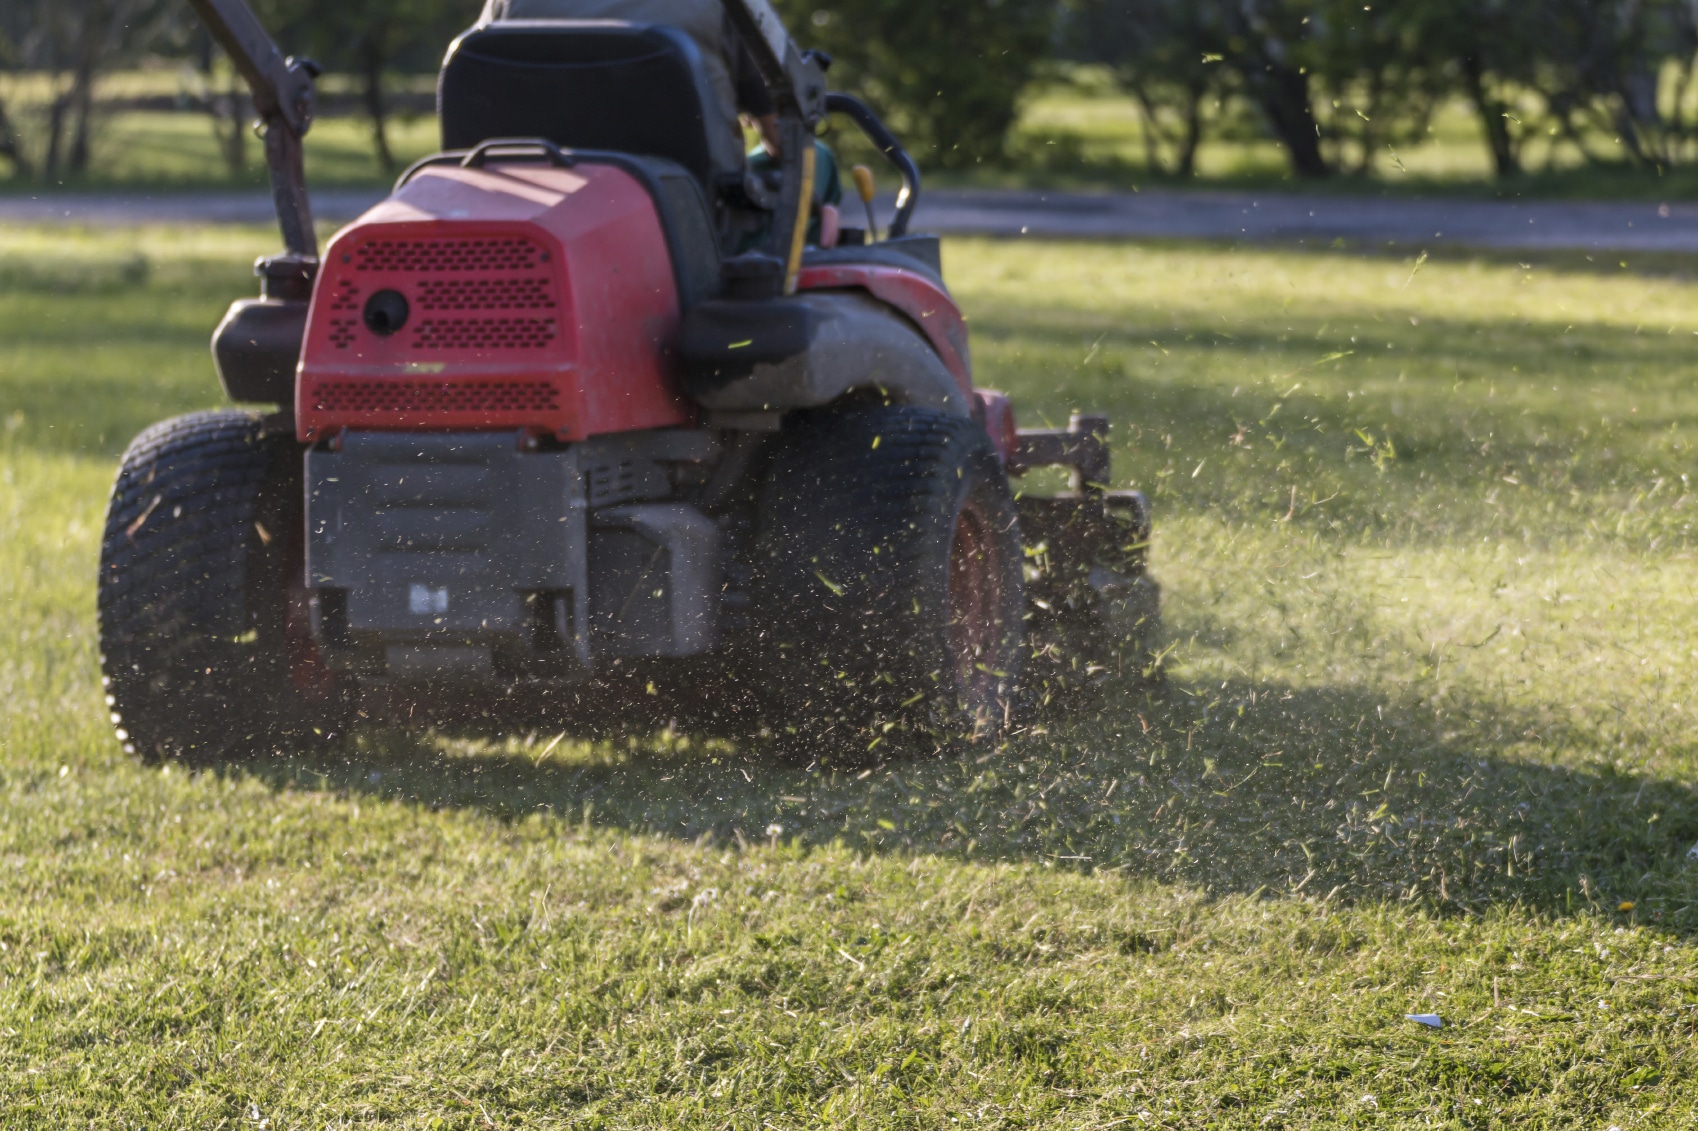 We Suggest These Tips When Using Your Lawn Mower